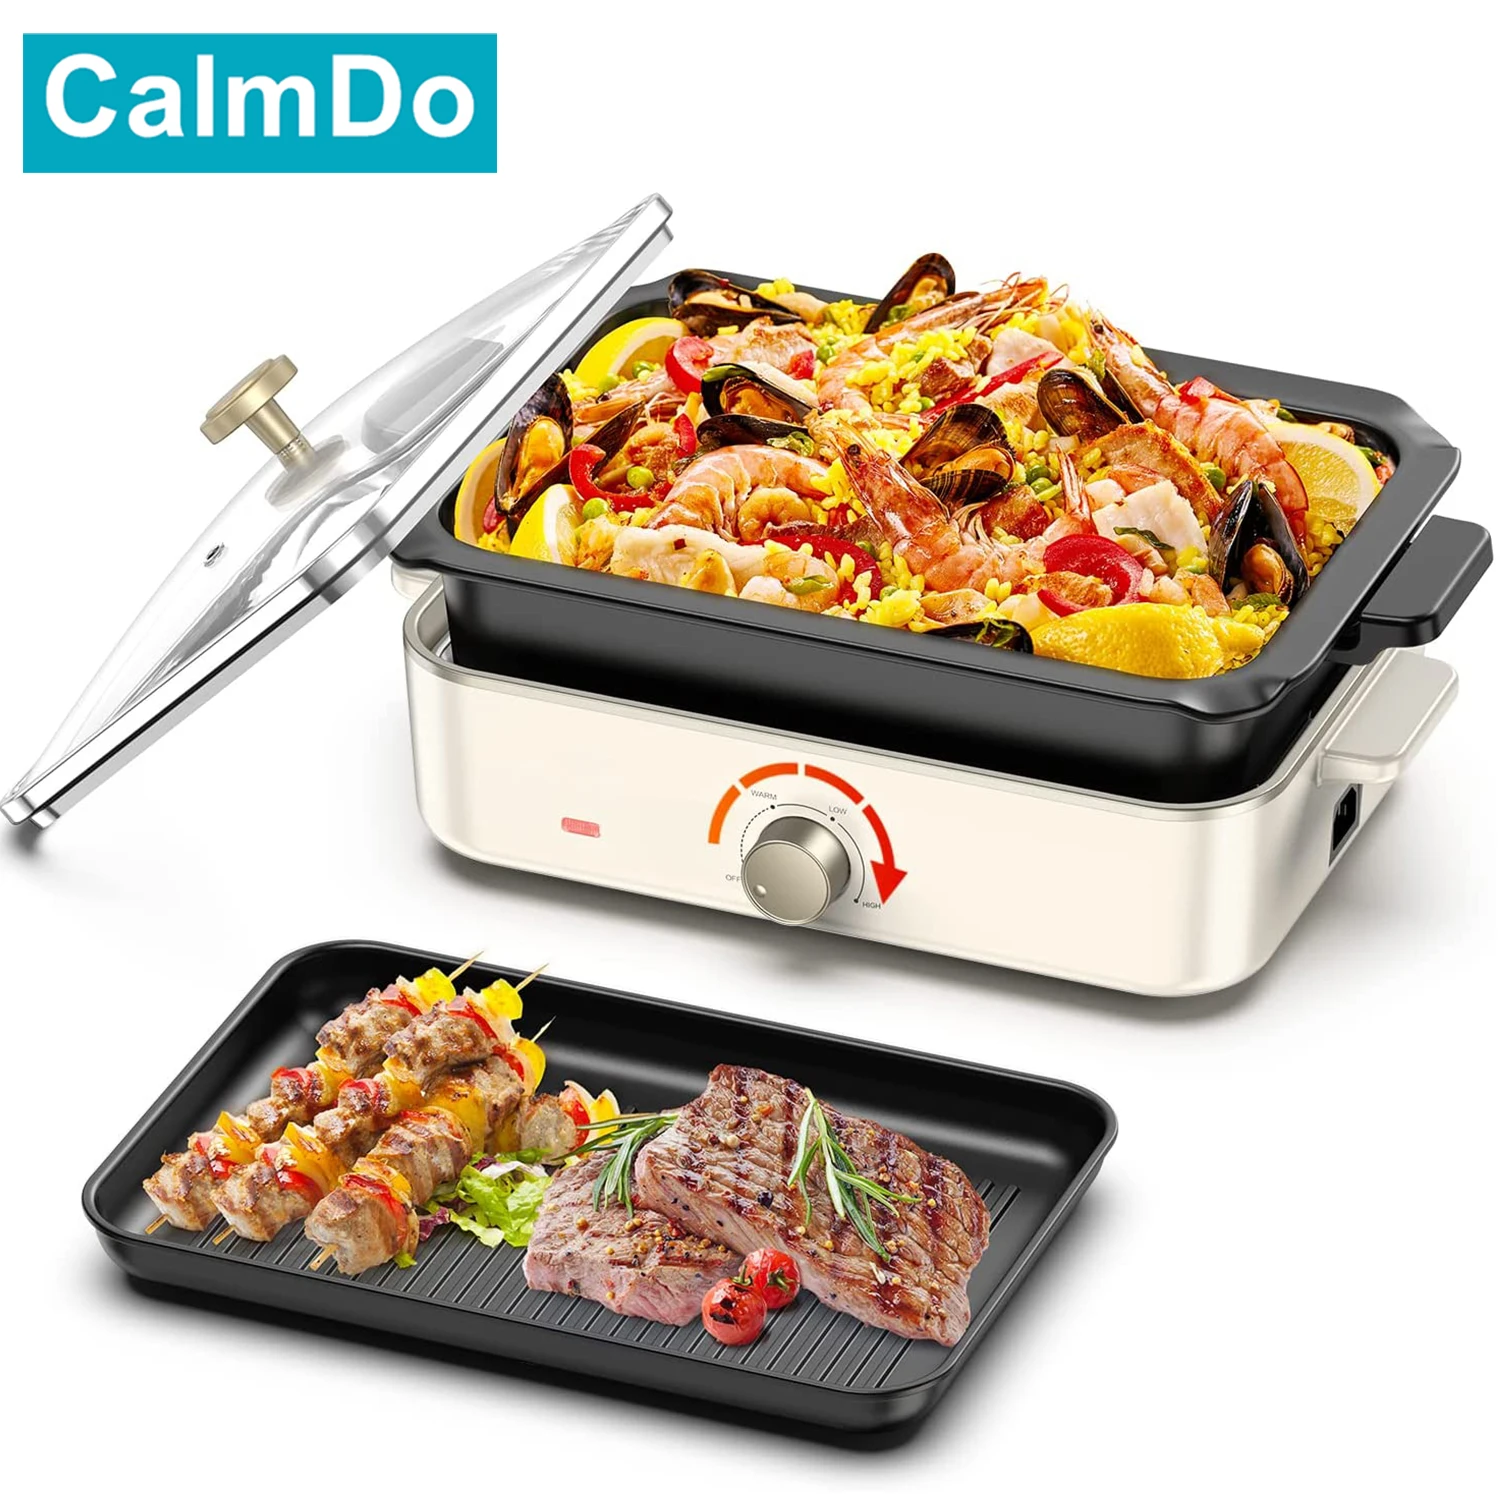 CalmDo 1400W Multi-function Electric Foldaway Skillet Grill Combo Home Cooking Pot Electric Barbecue Barbecue Stove Skillet